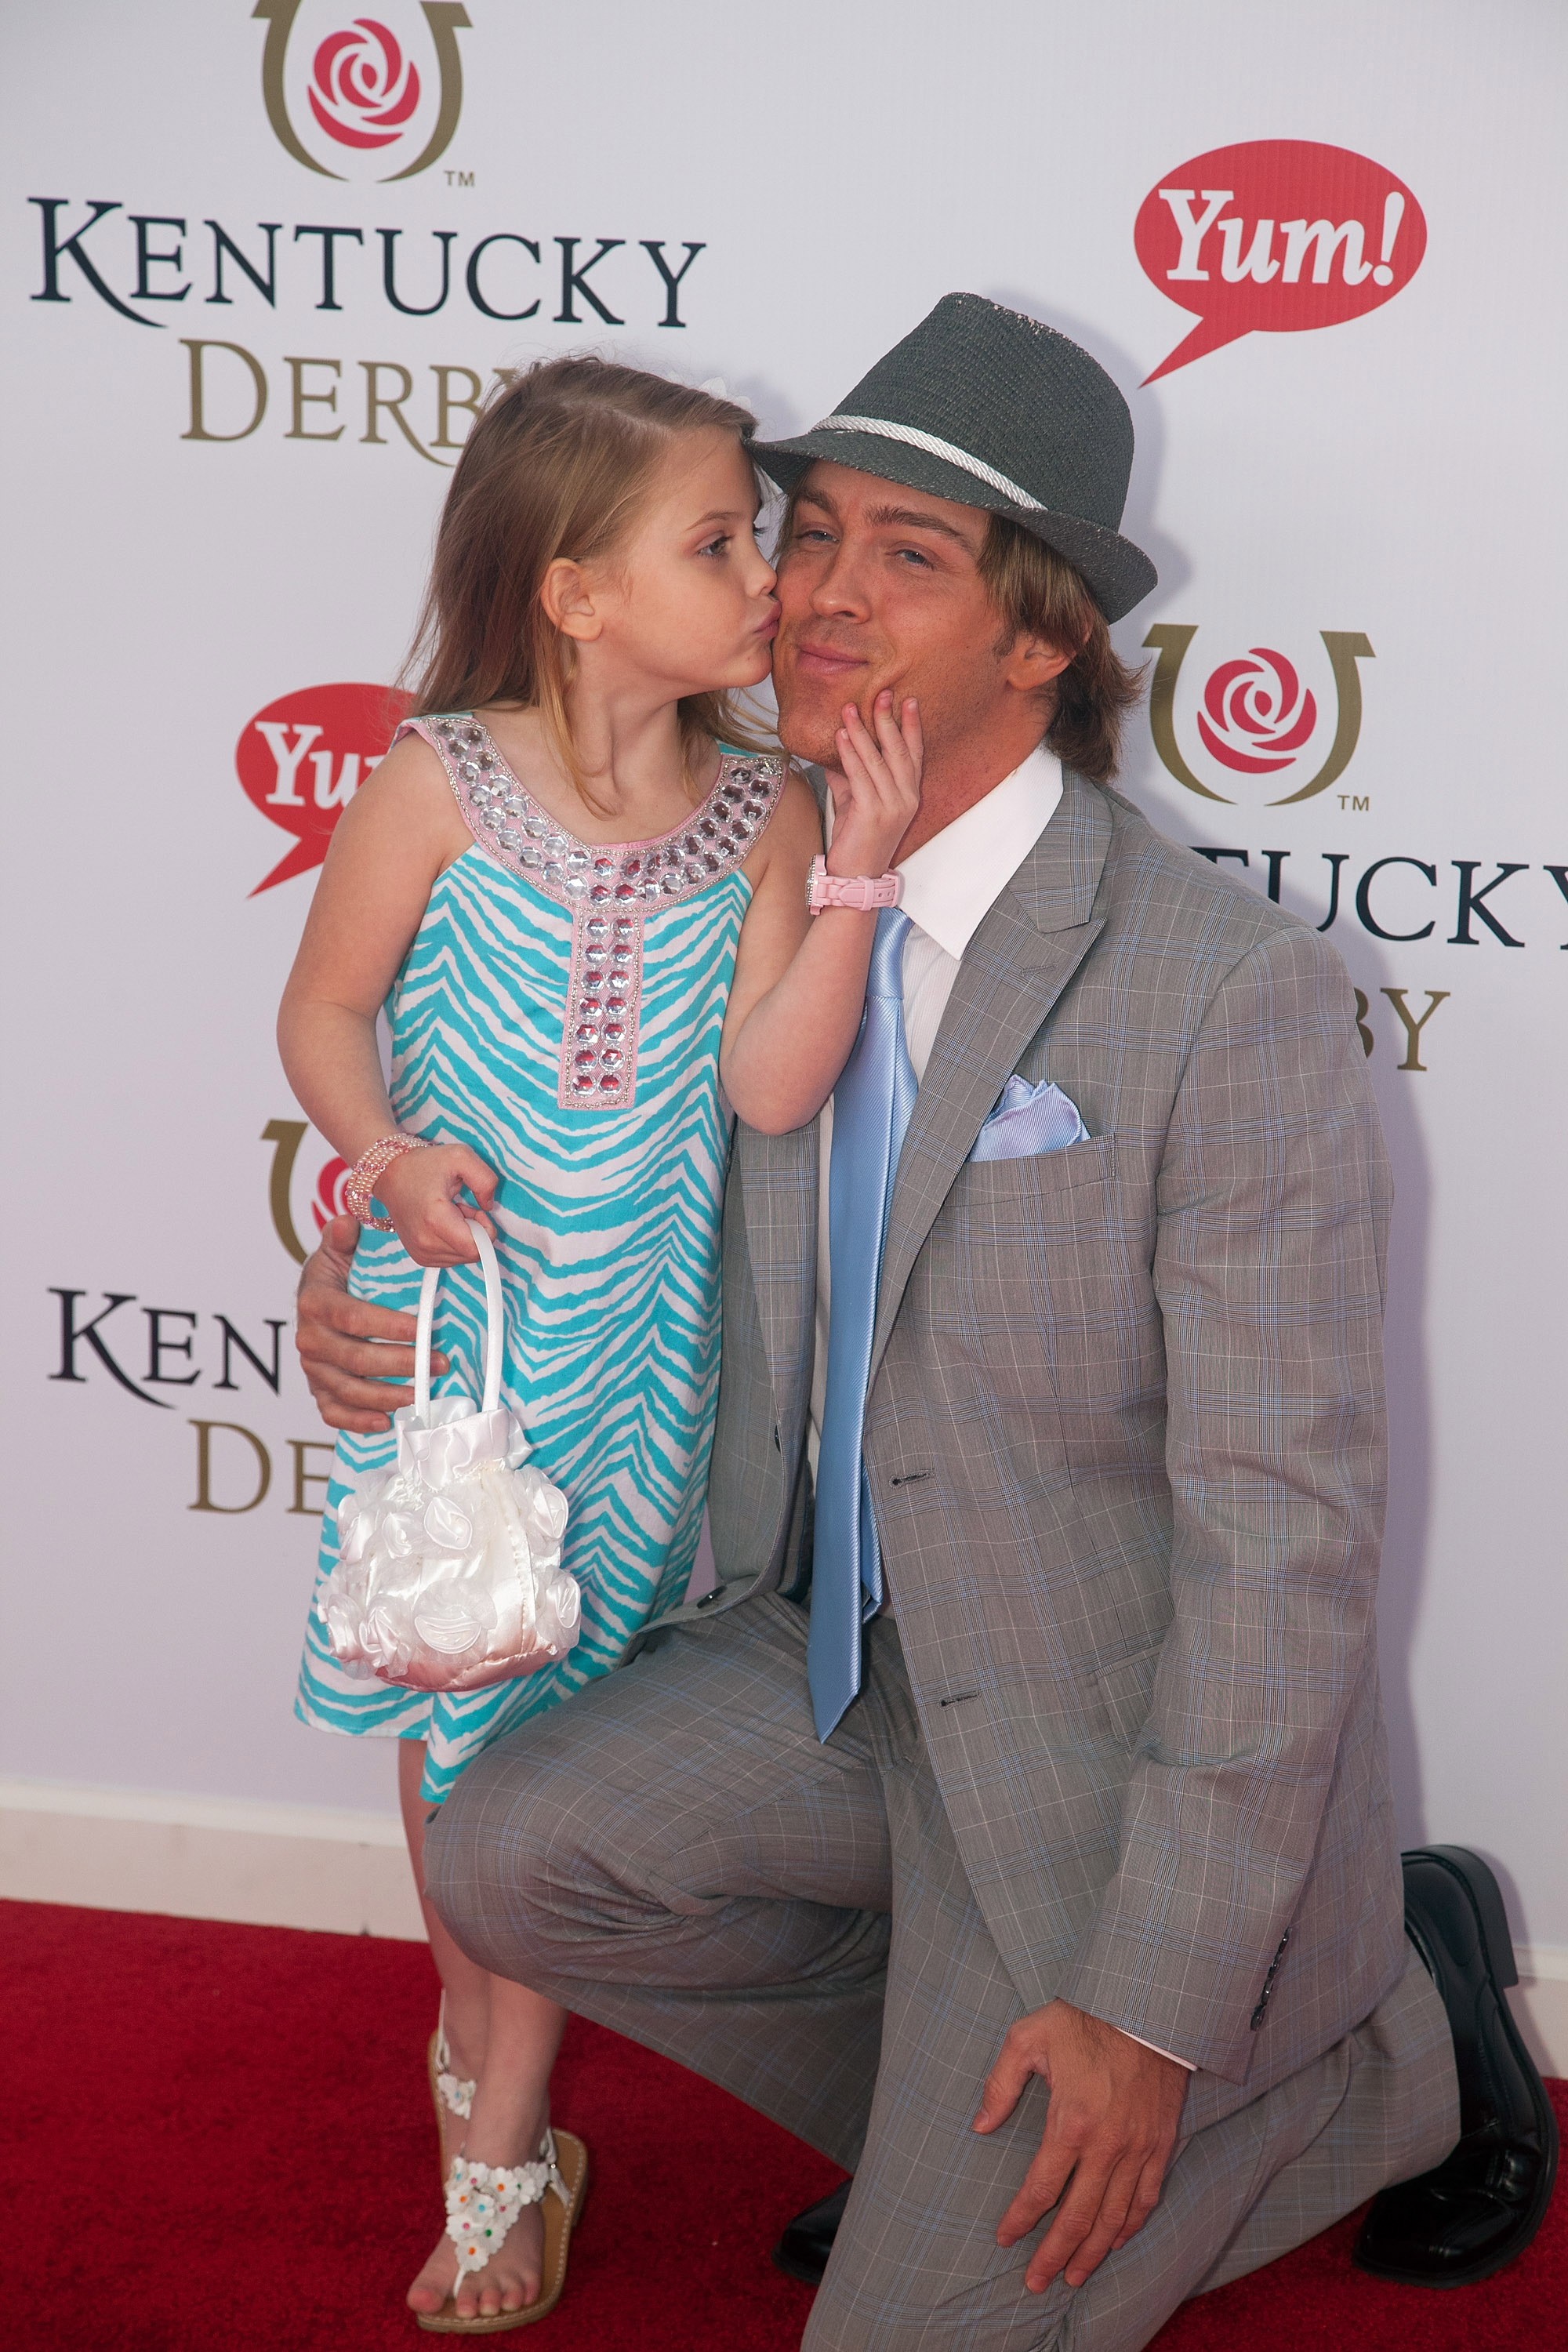 Dannielynn Smith and Larry Birkhead Louisville, Kentucky. in 2011 | Source: Getty Images